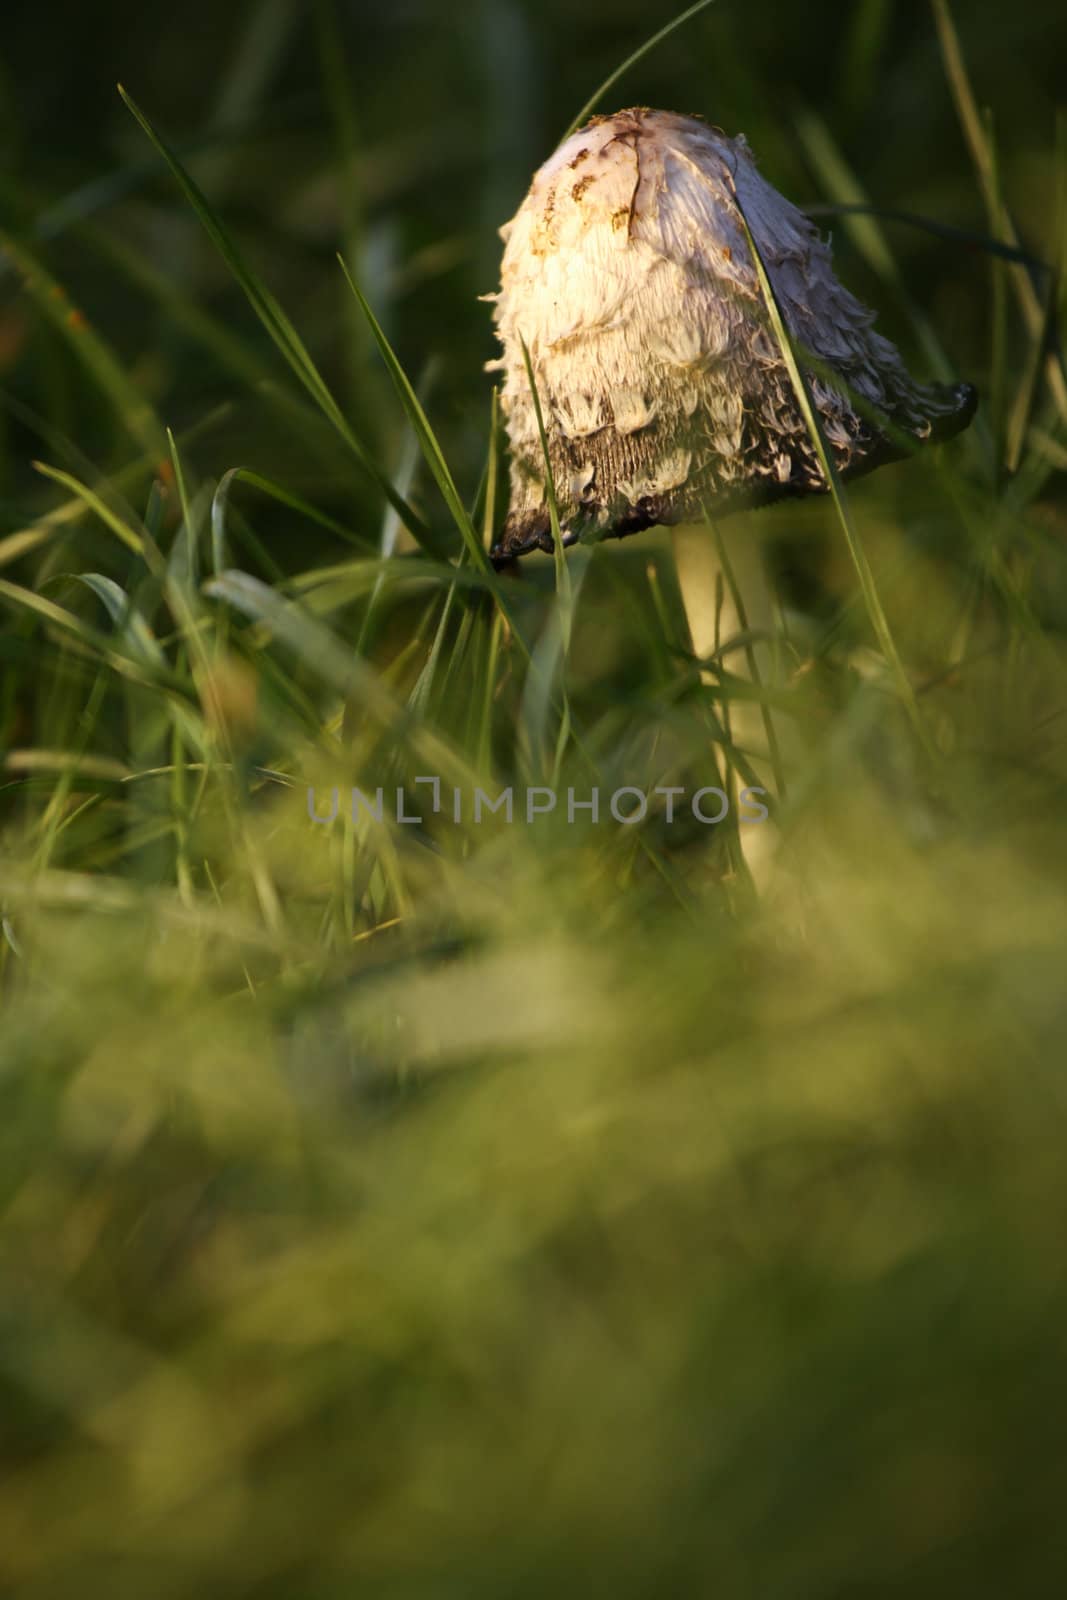 Mushroom in grass by ailani_graphics